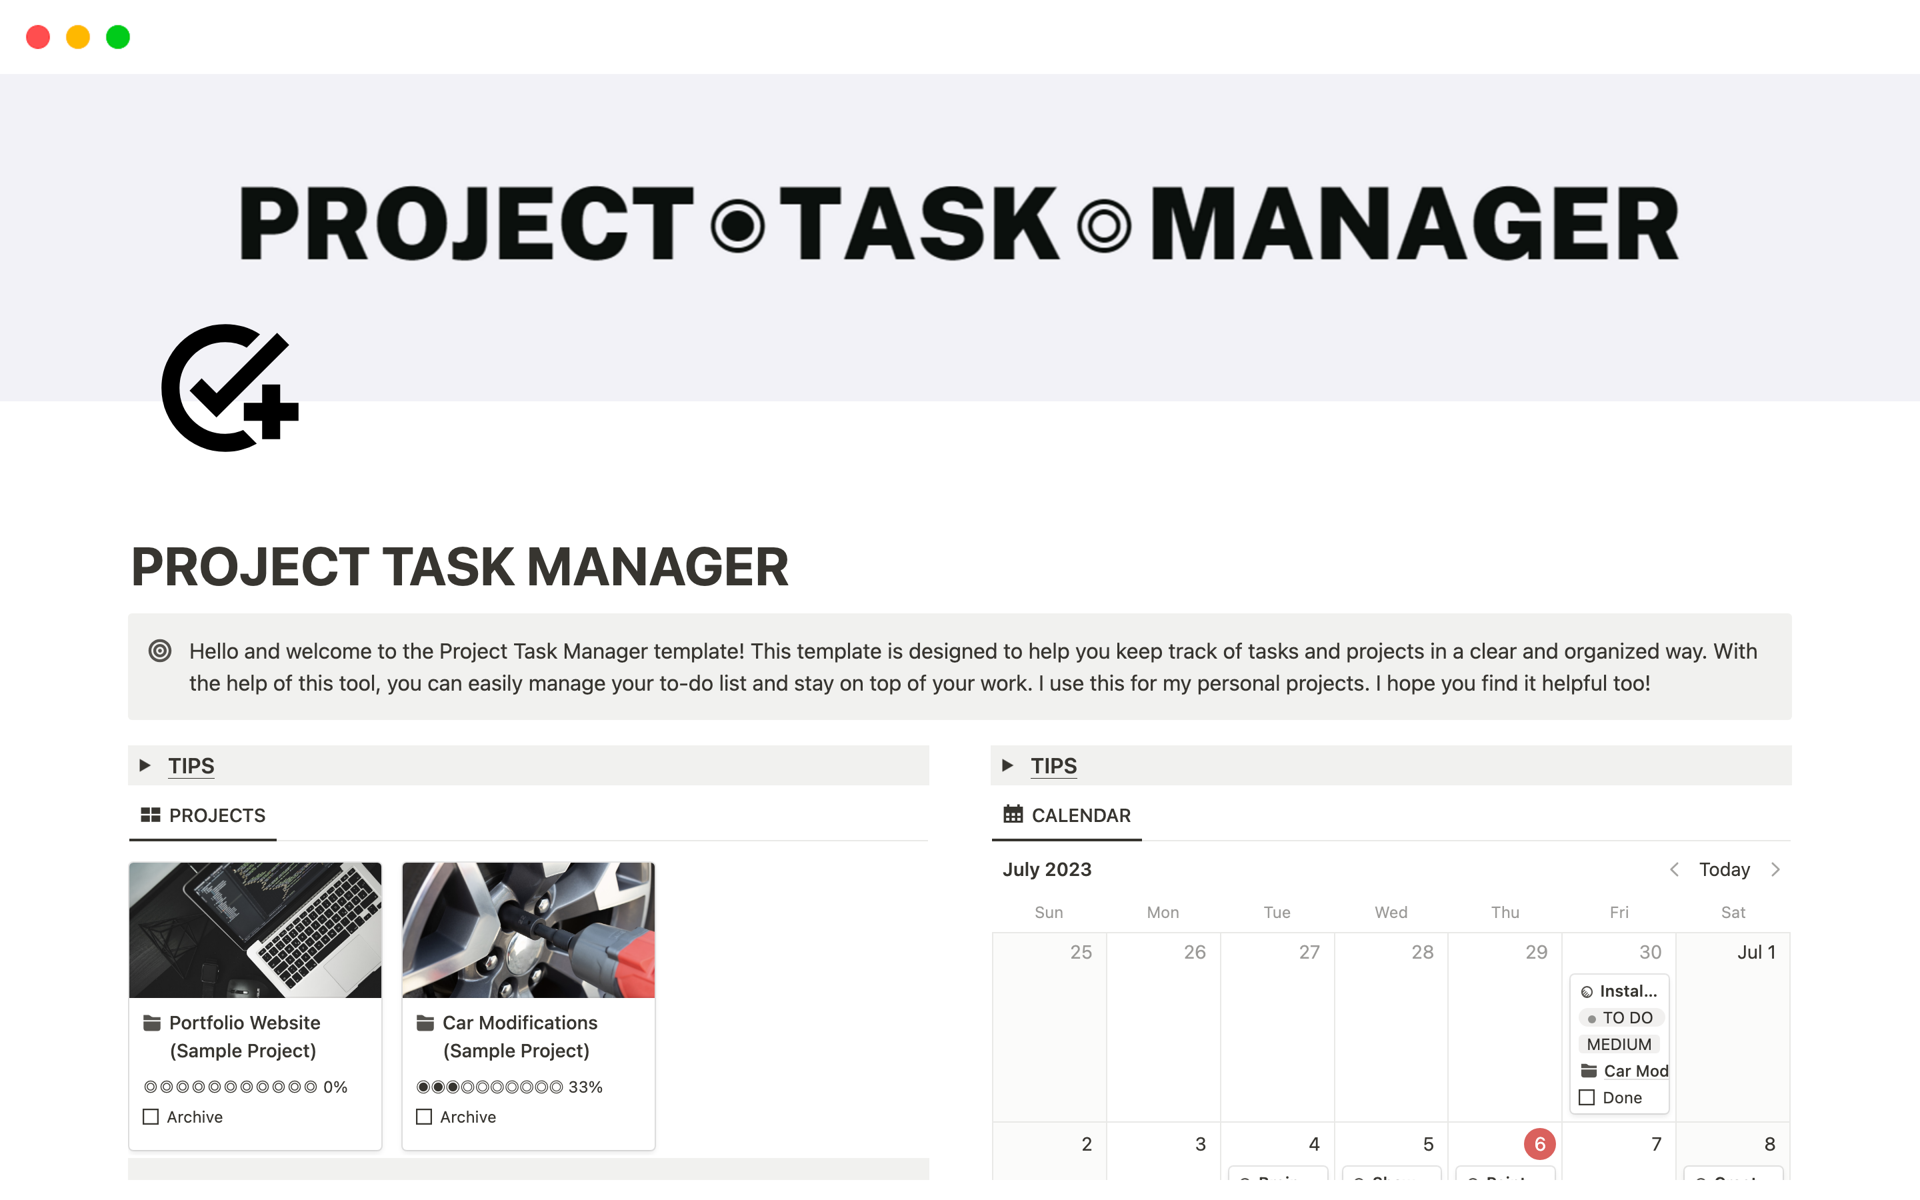 Introducing the Project Task Manager: Revolutionize your project management and boost your productivity like never before.